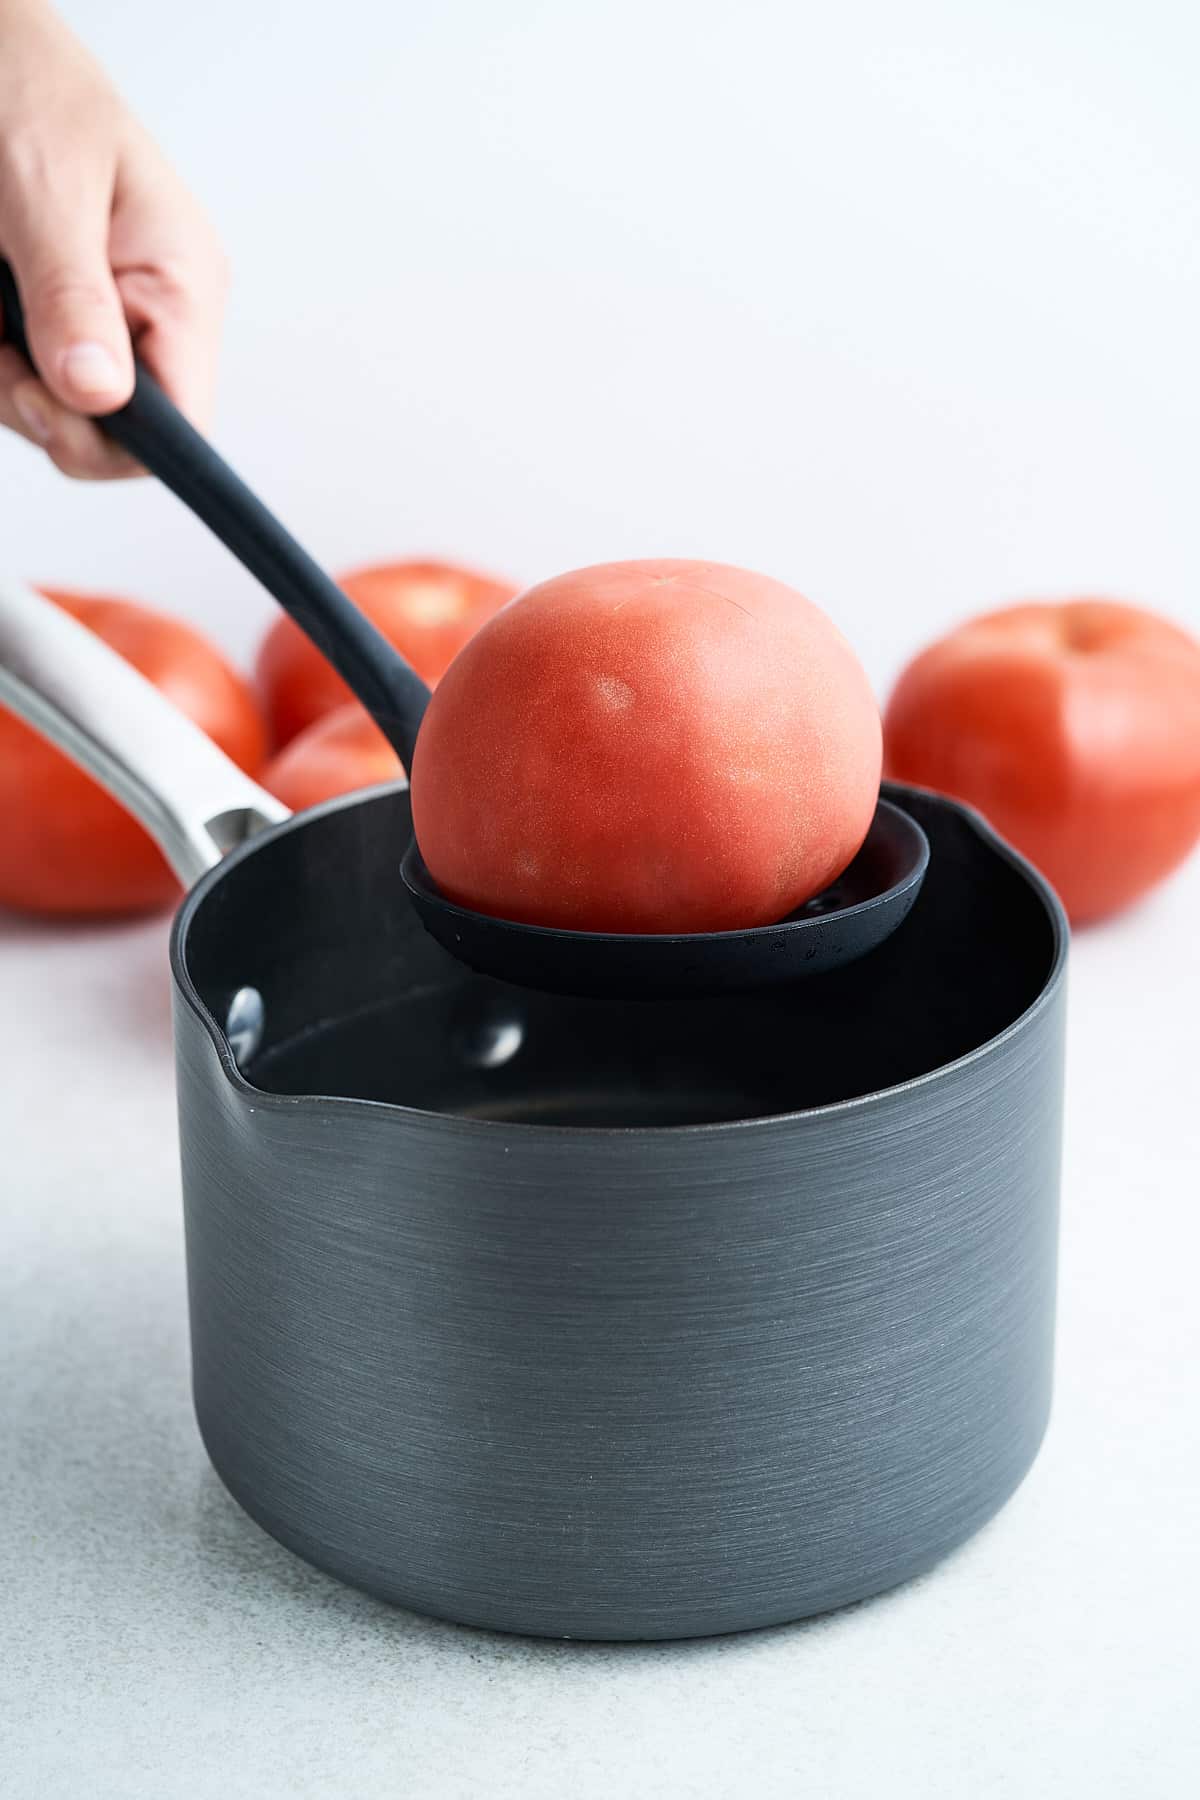 Adding a tomato to a pot of boiling water.